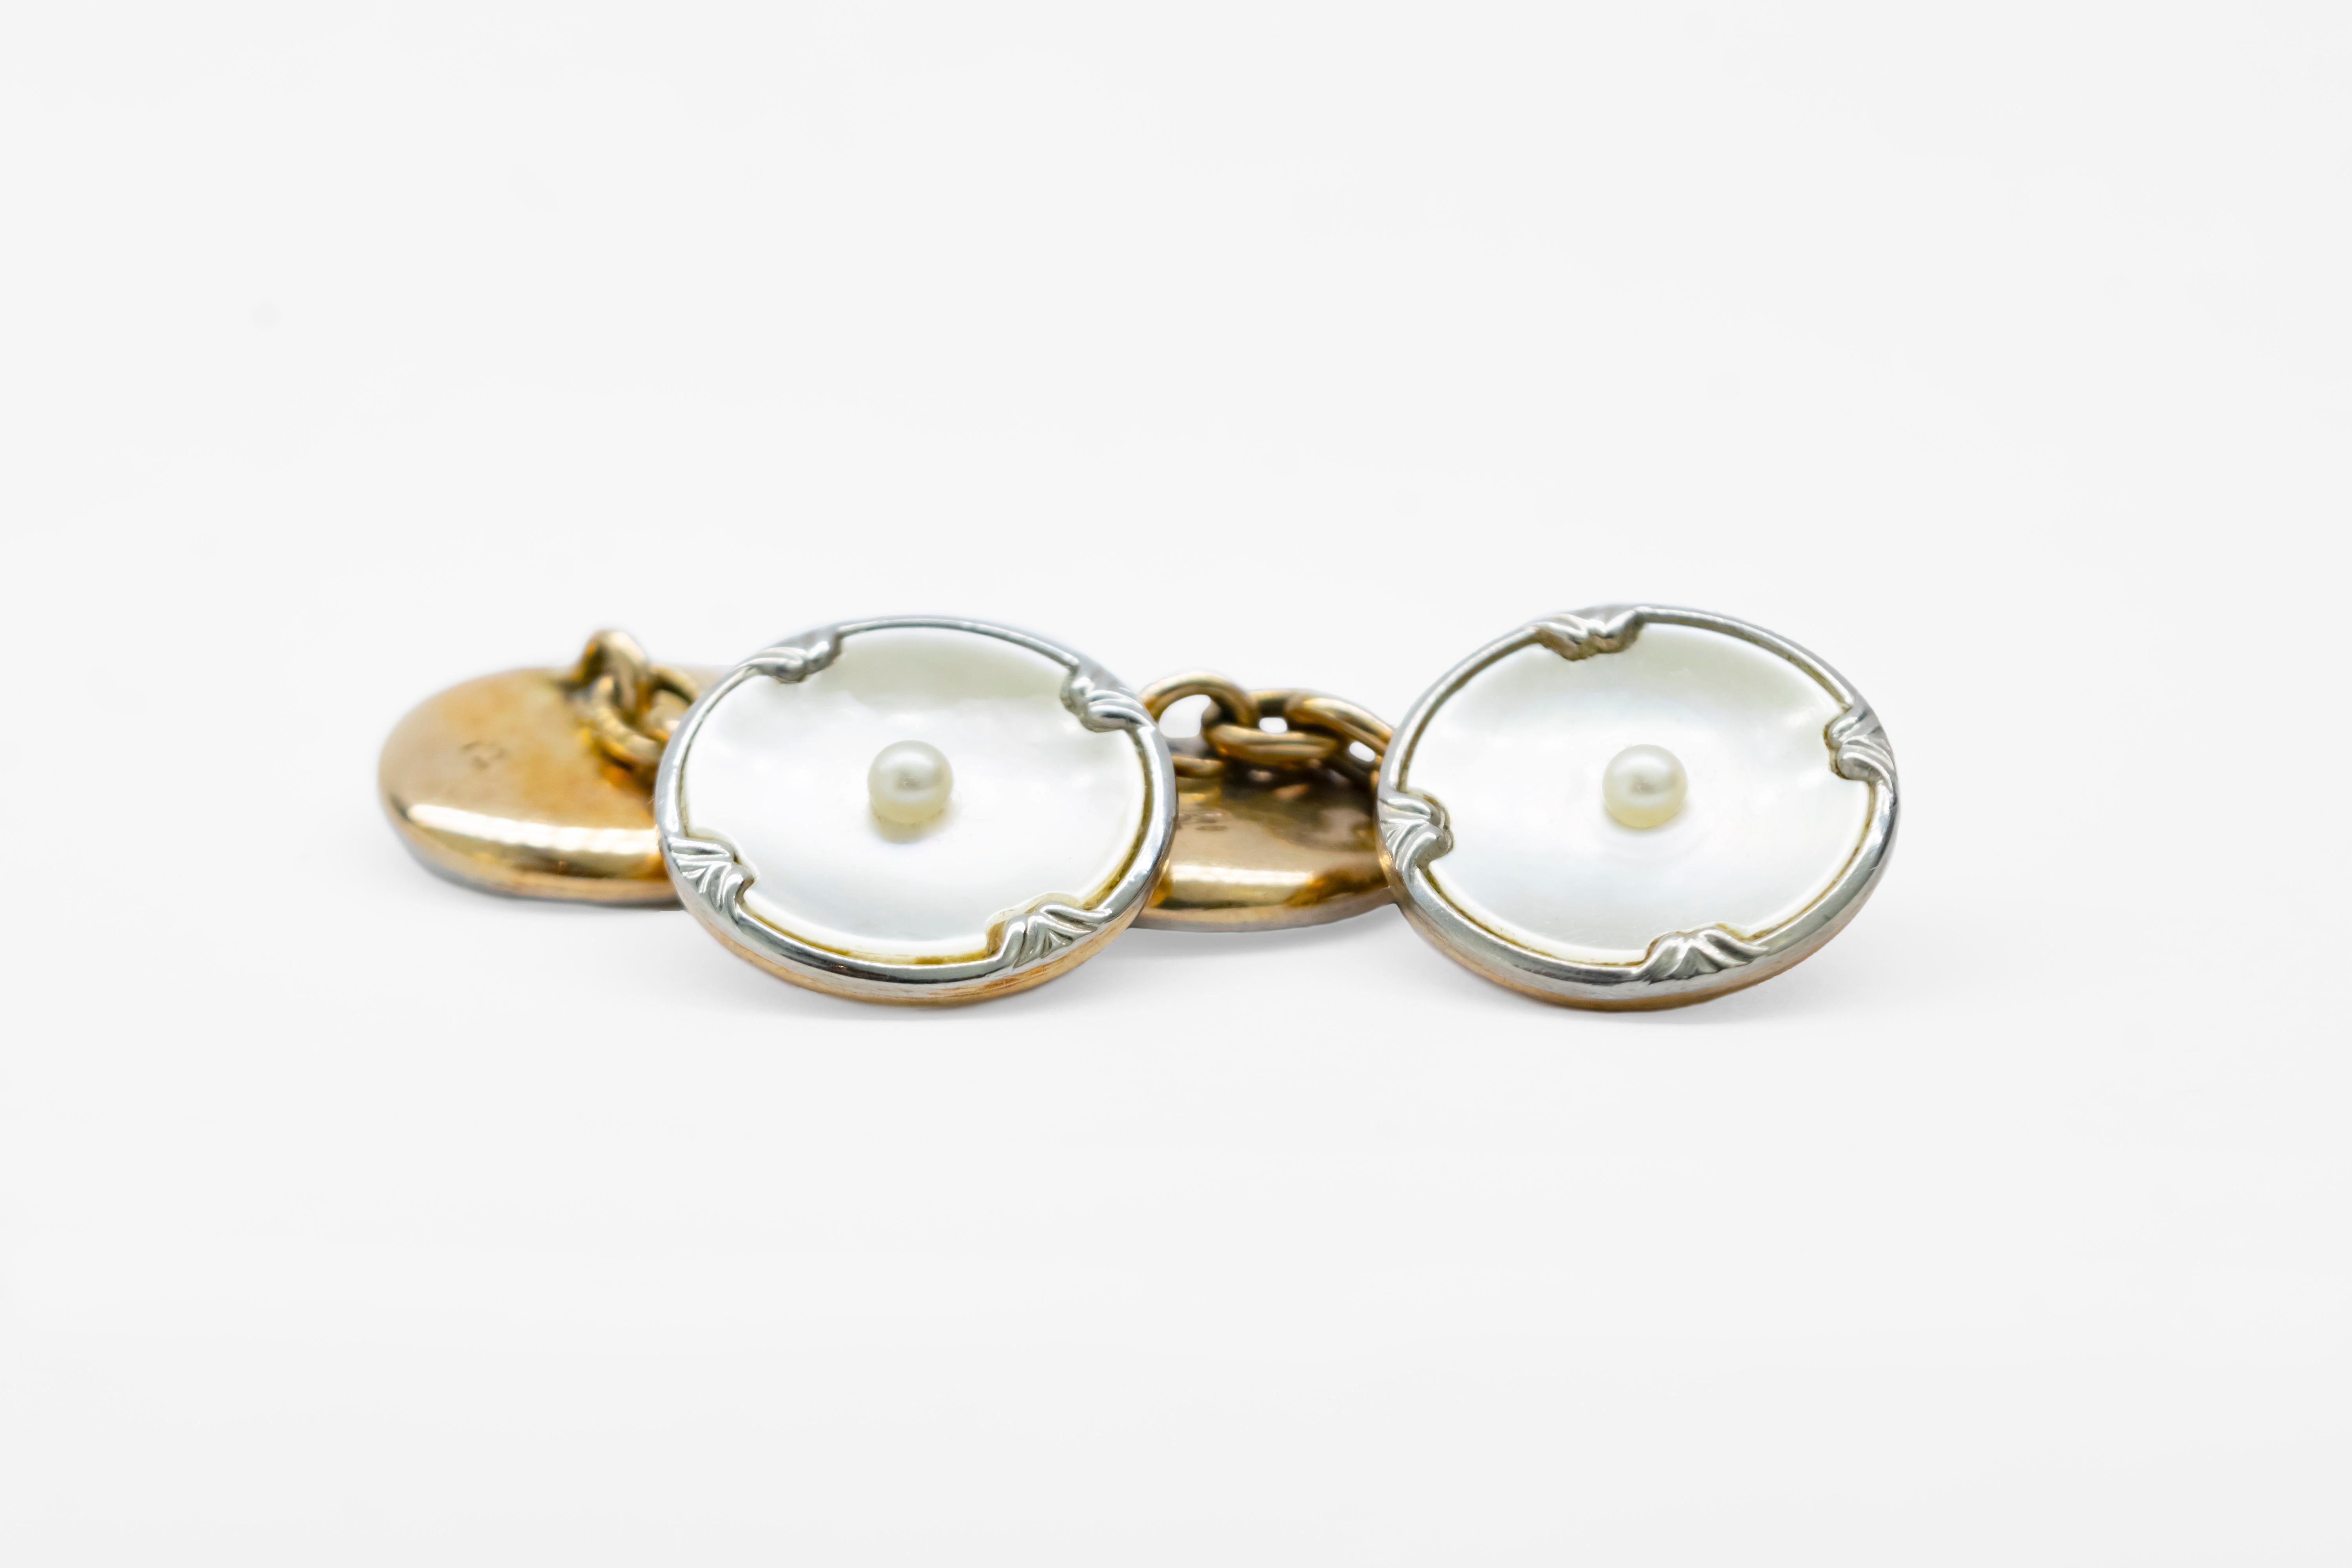 Art Deco Mother-of-Pearl and Gold Tuxedo Suite of Cufflinks In Good Condition For Sale In London, London